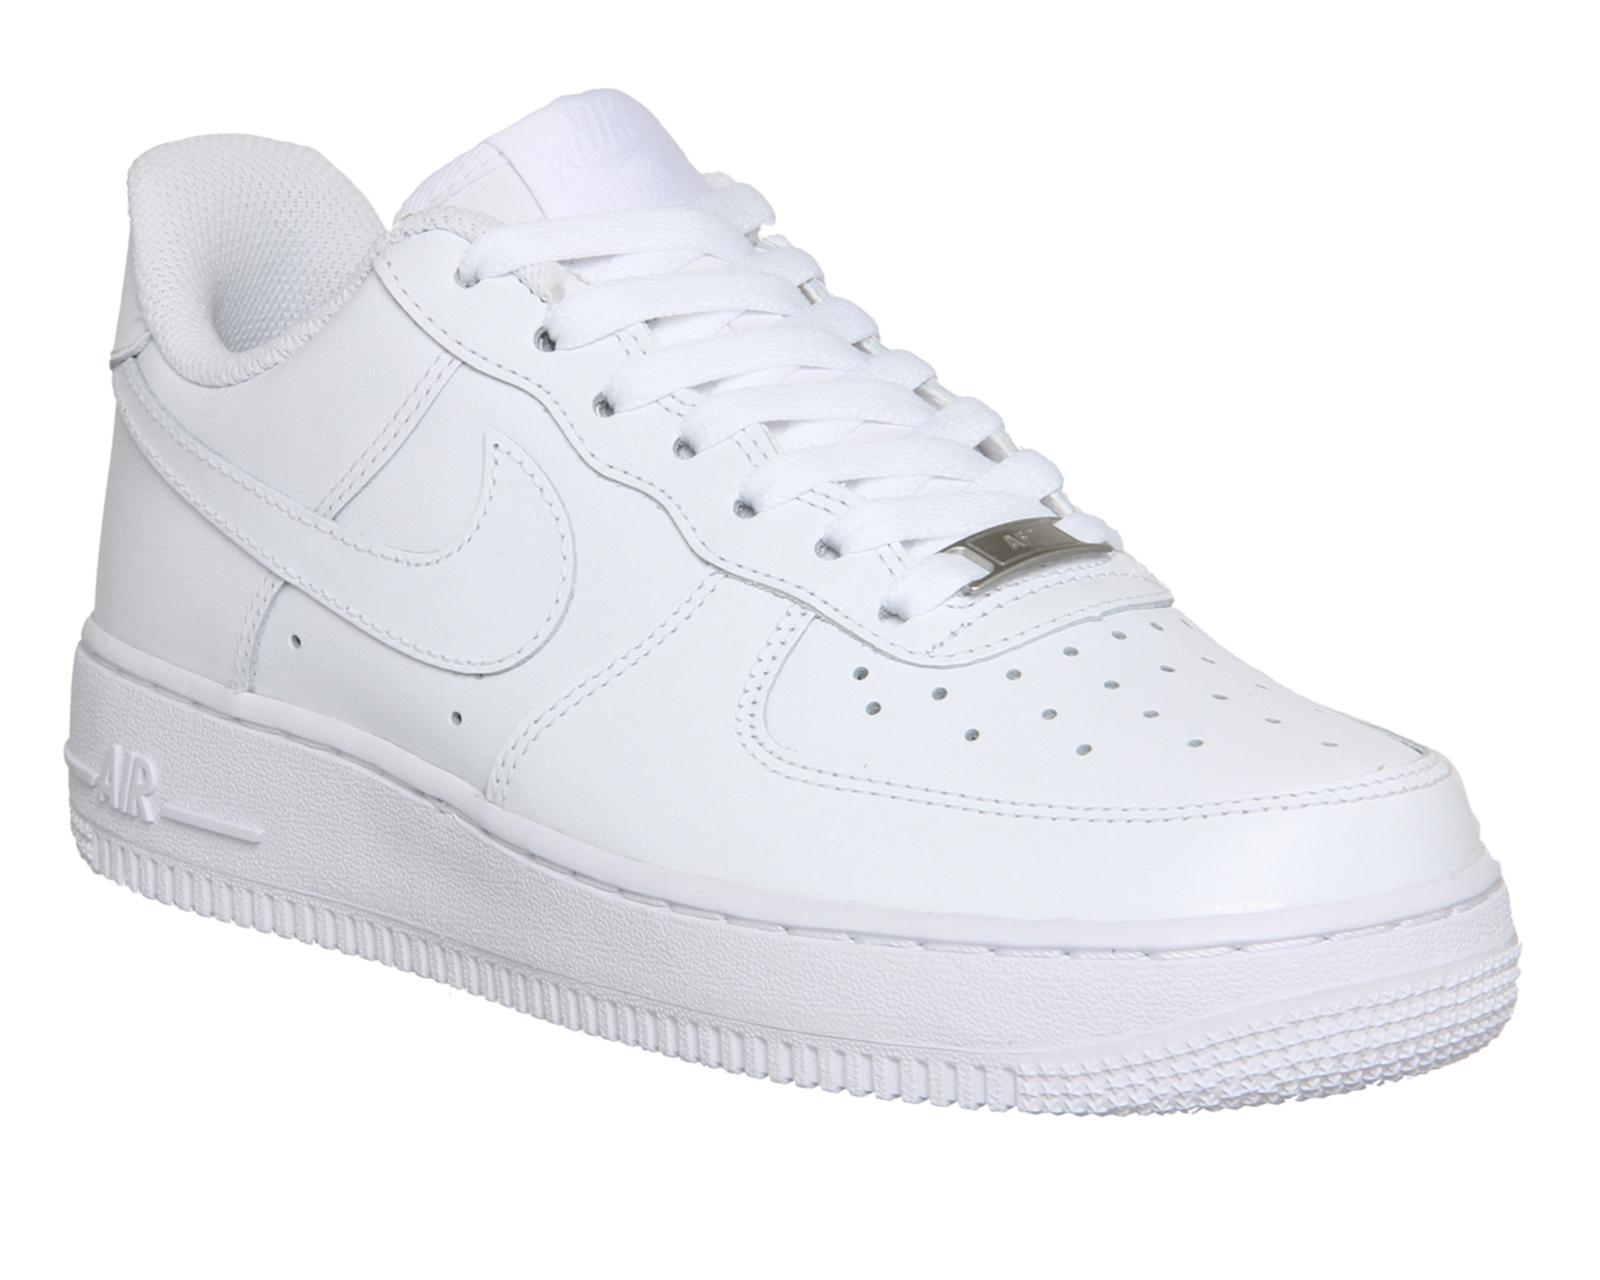 Nike Air Force 1 Leather Sneakers in White - Lyst